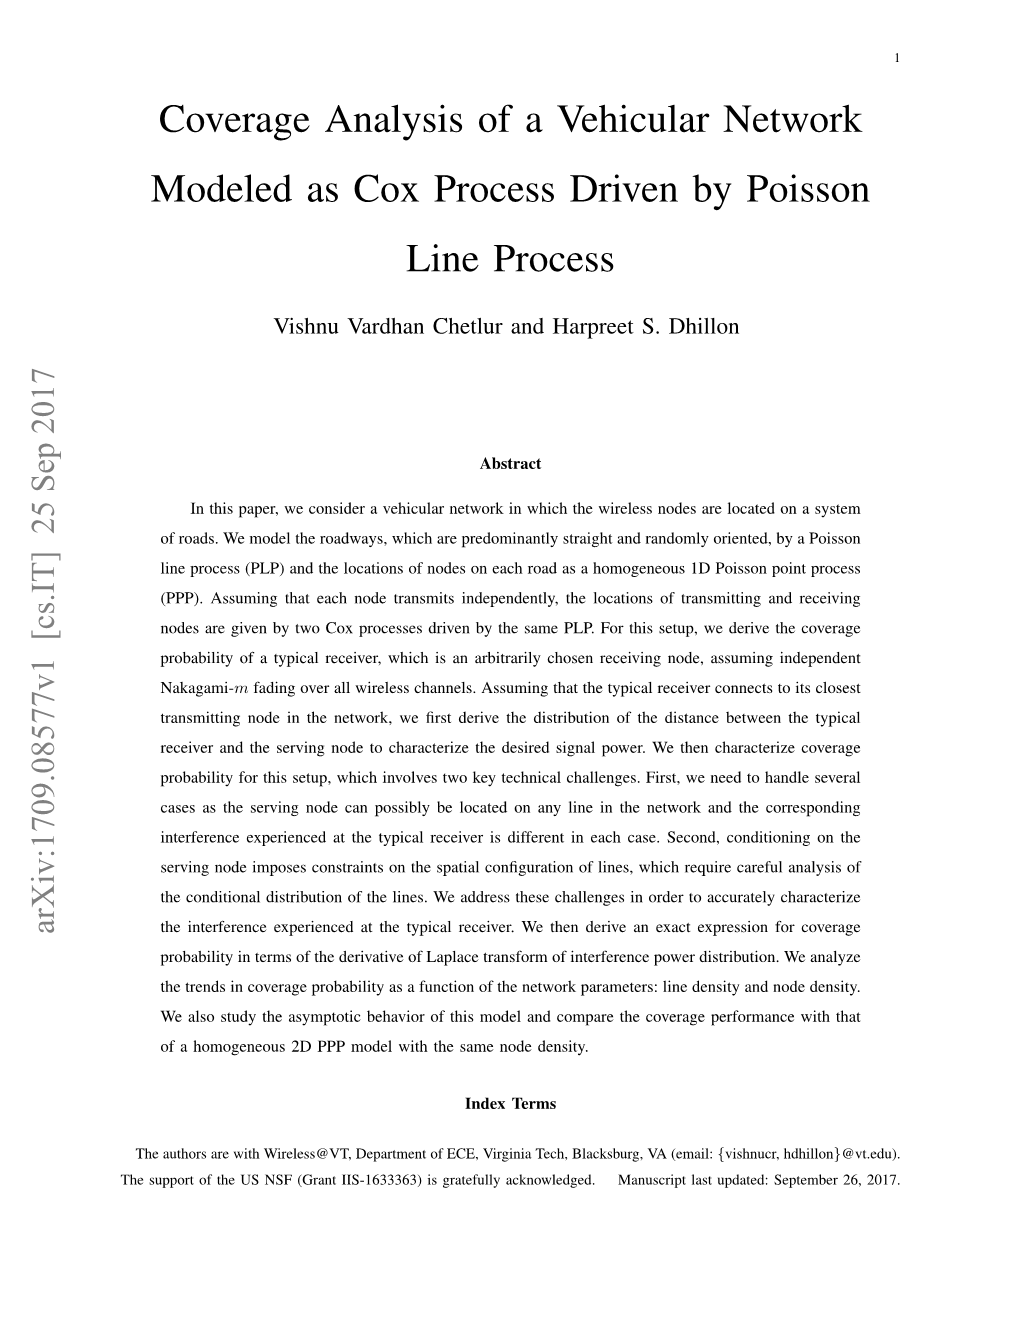 Coverage Analysis of a Vehicular Network Modeled As Cox Process Driven by Poisson Line Process